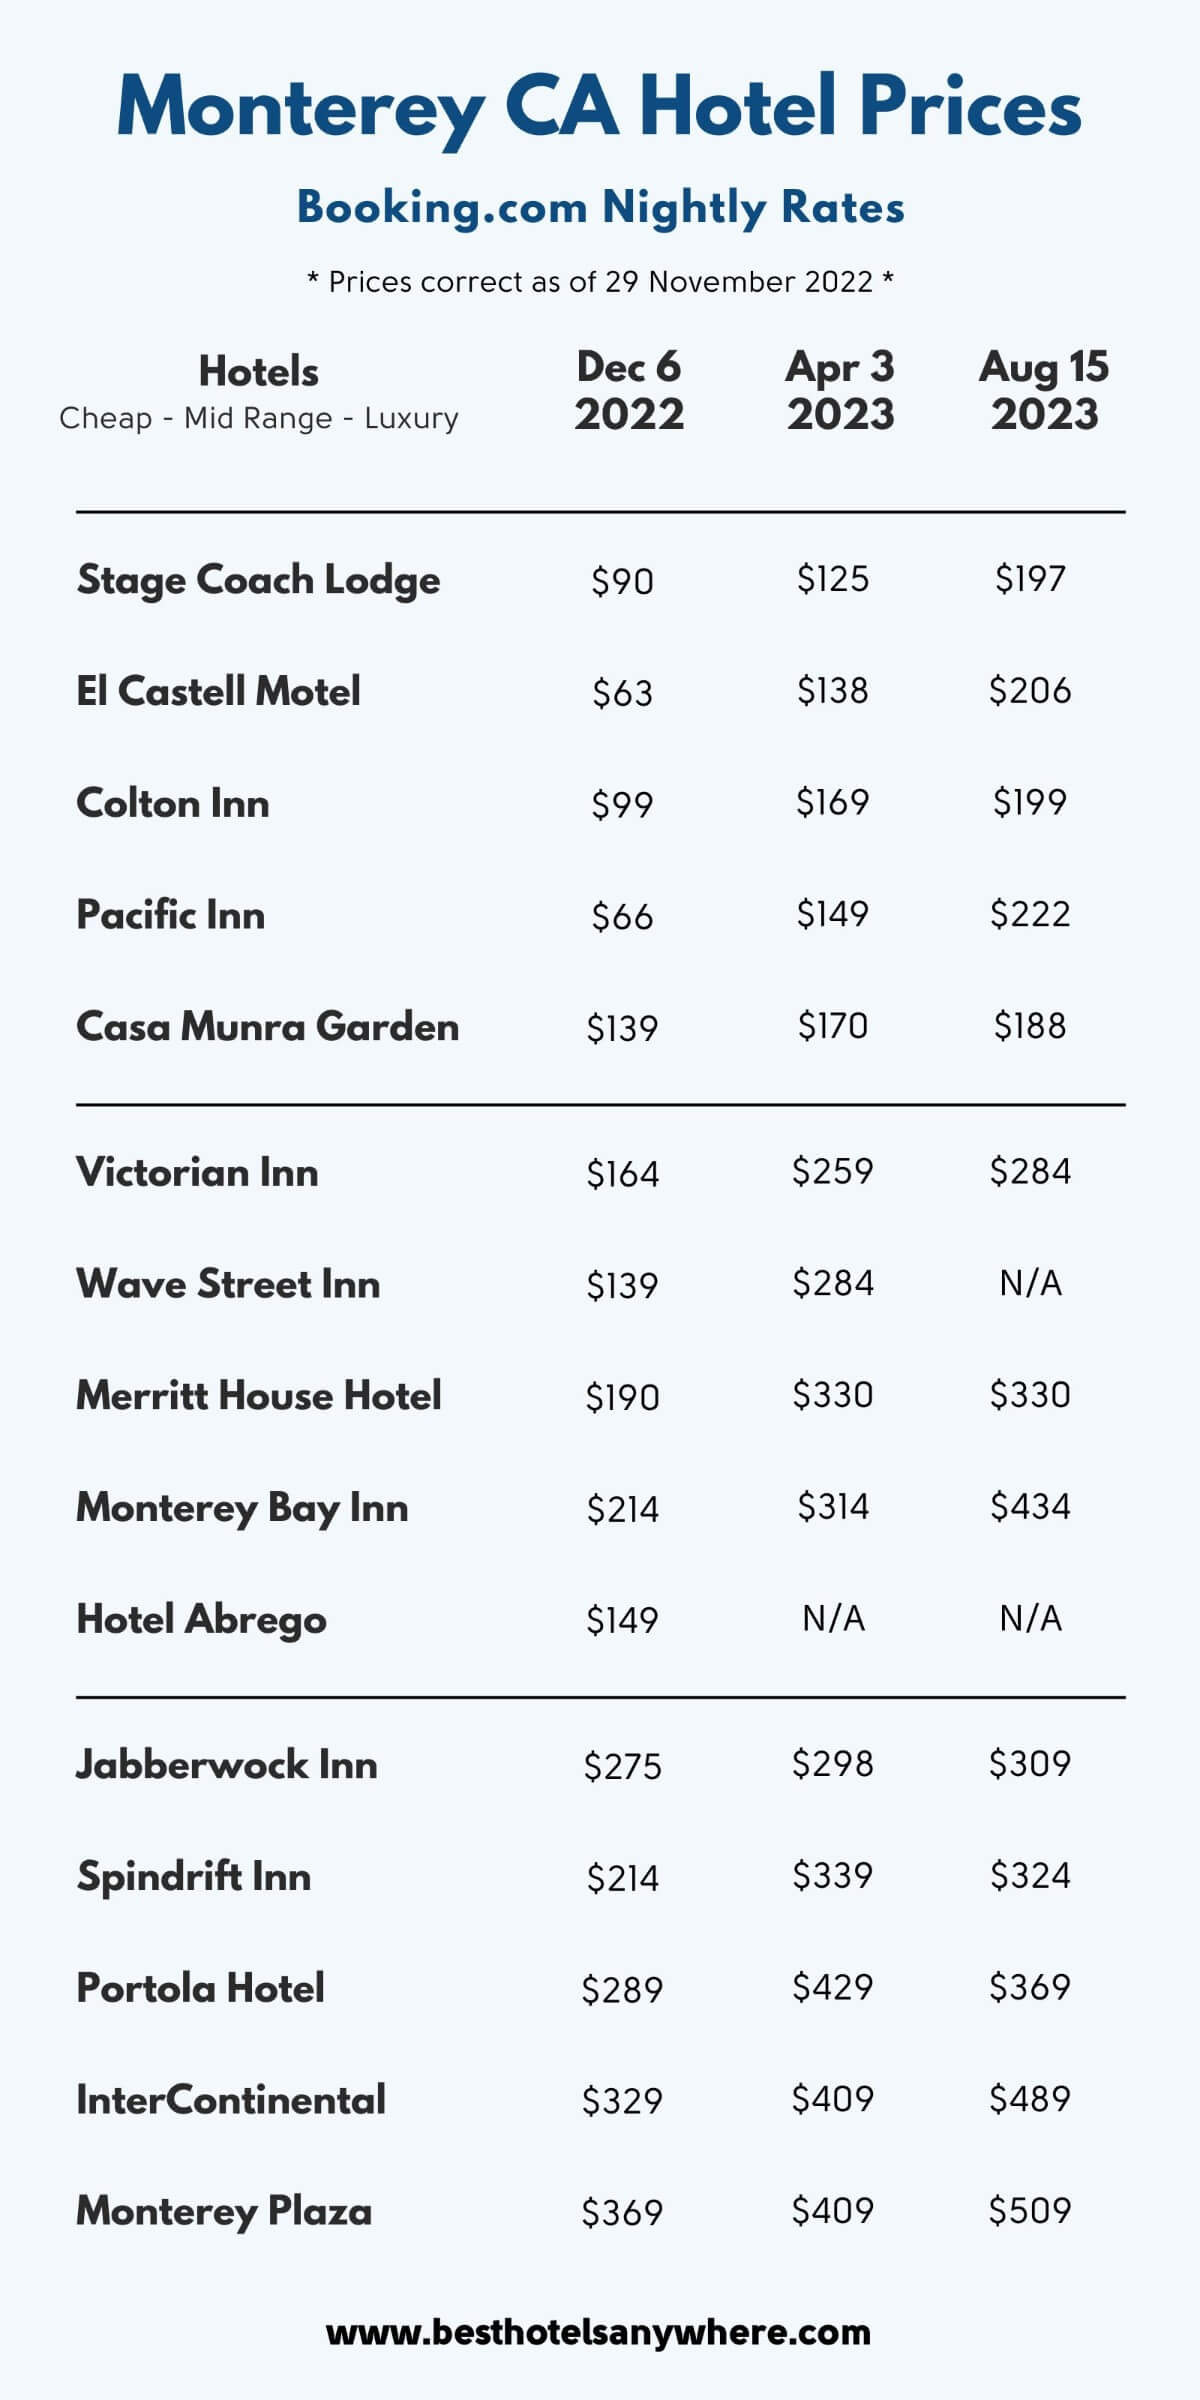 Hotel prices for three future dates in Monterey CA infographic by Best Hotels Anywhere